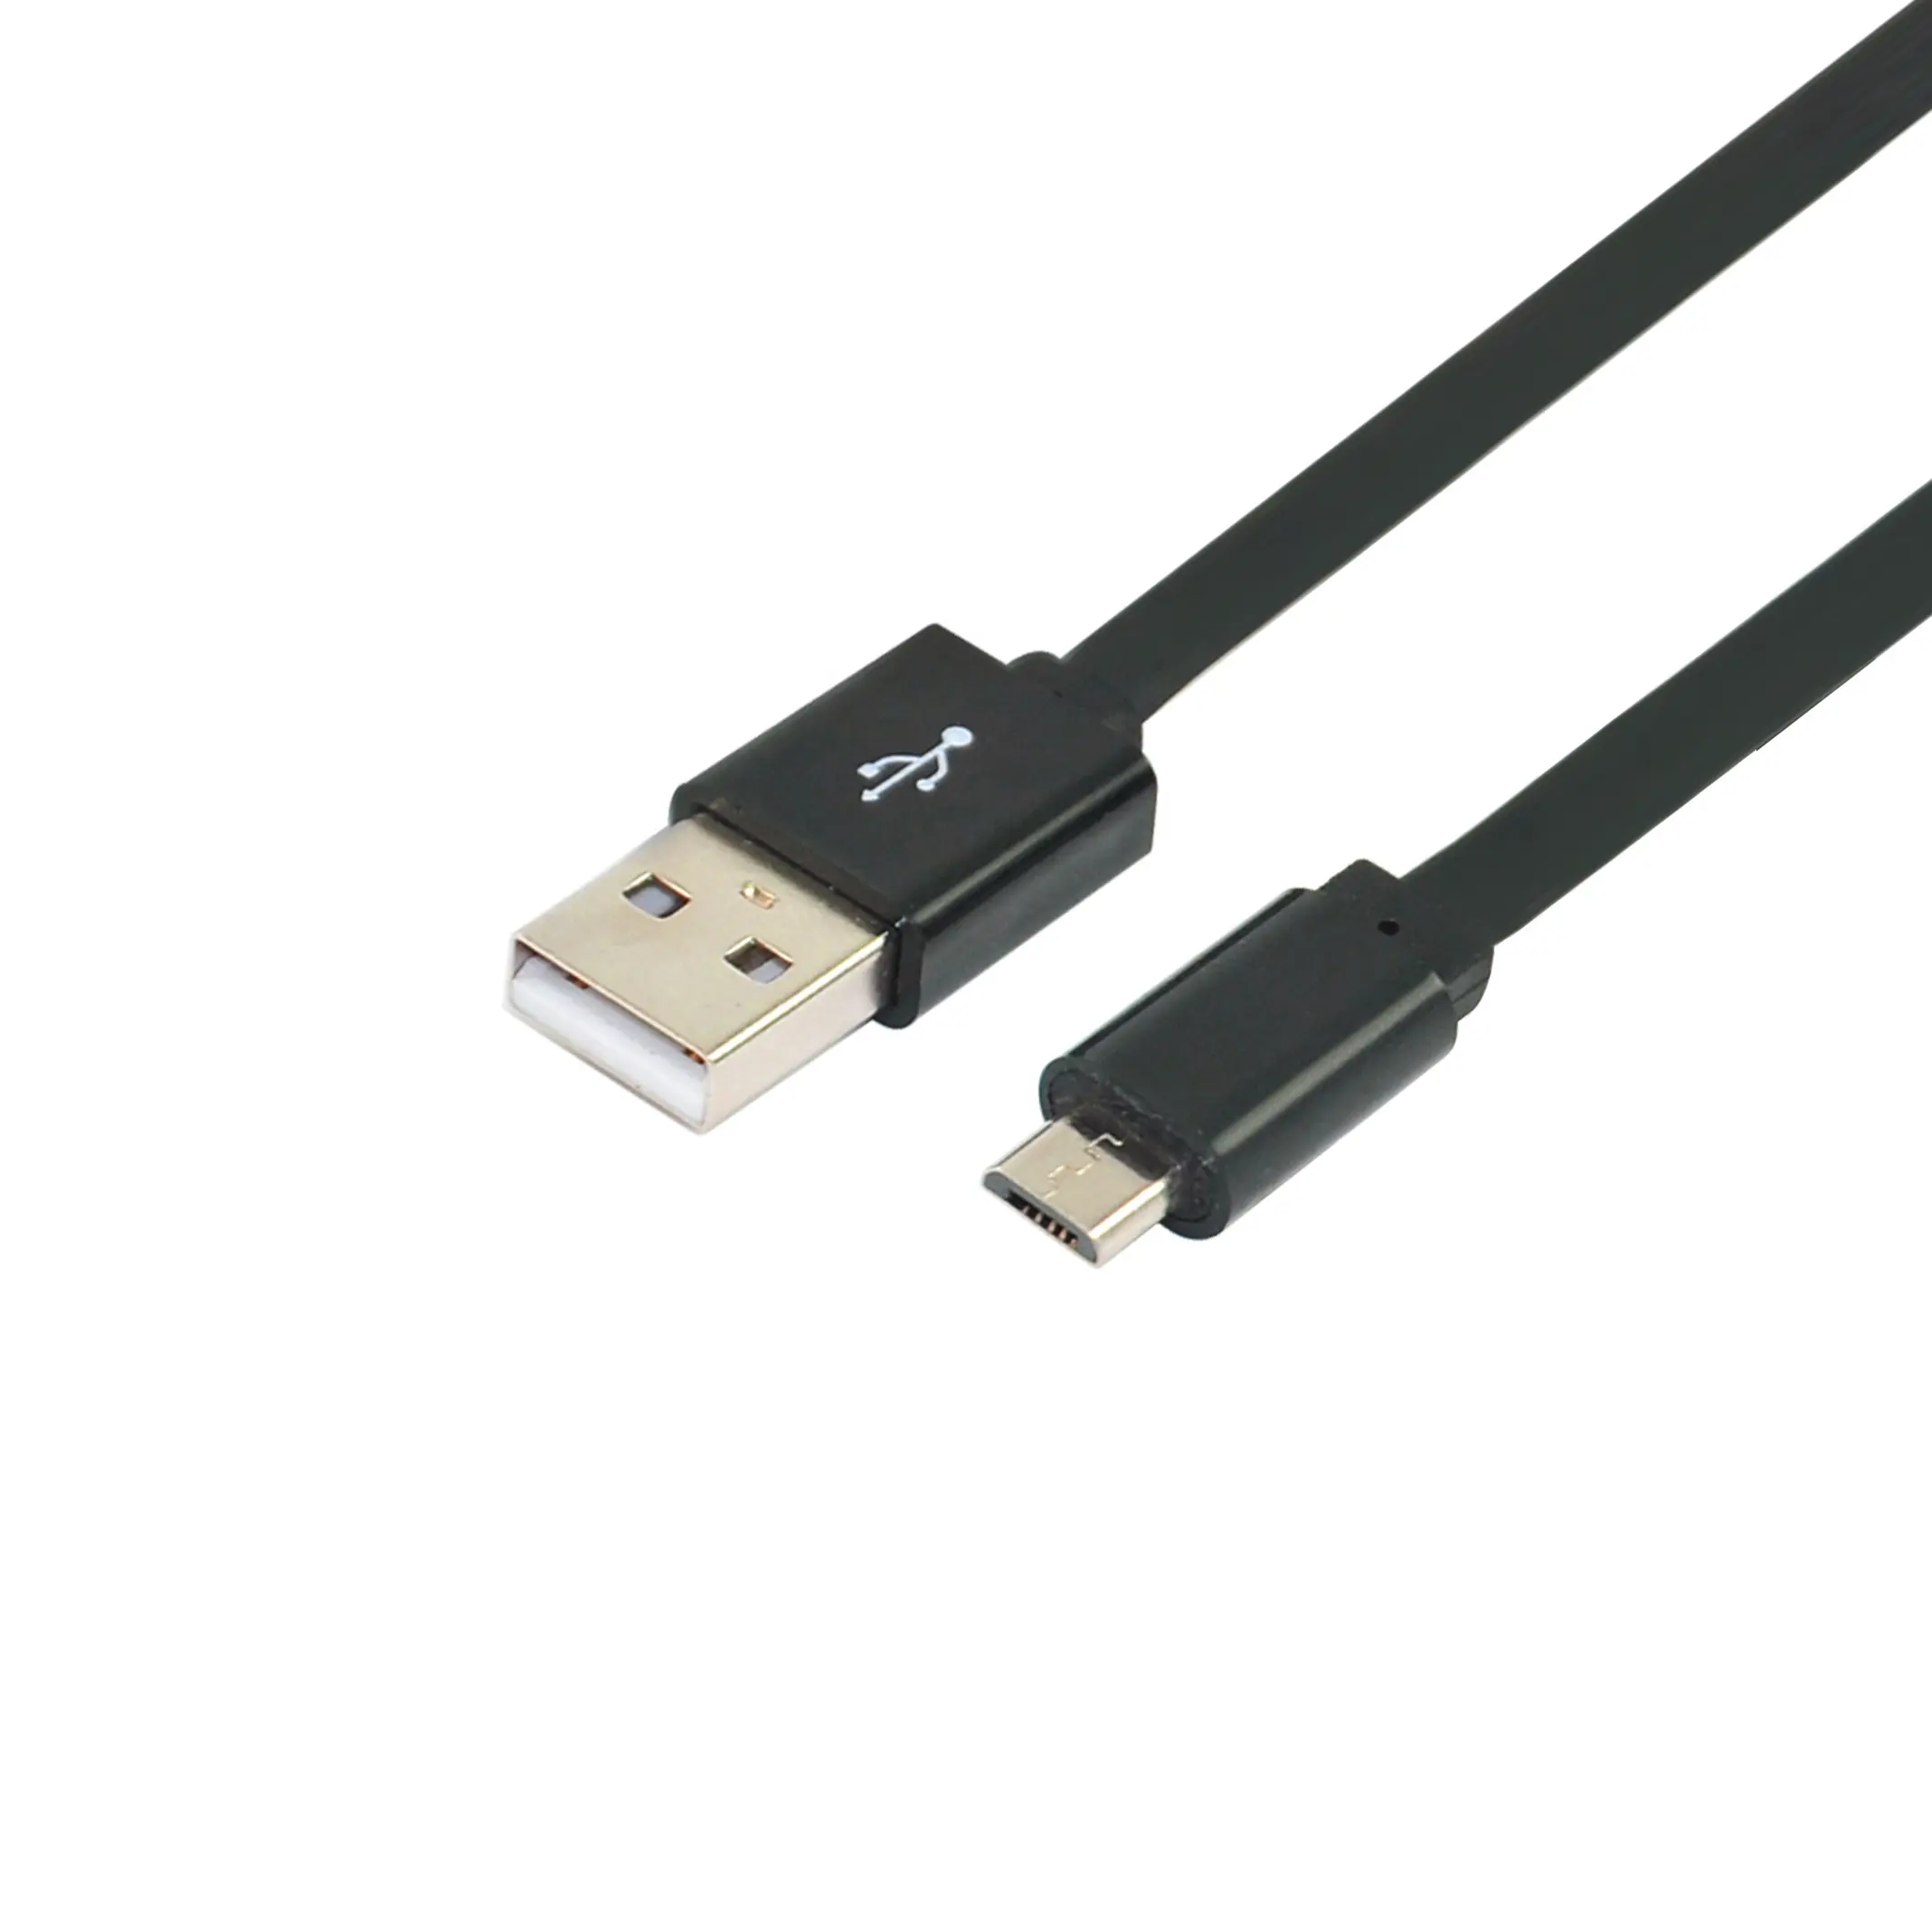 6mm width flat micro usb cable data charge cable V8 usb cable for android phone